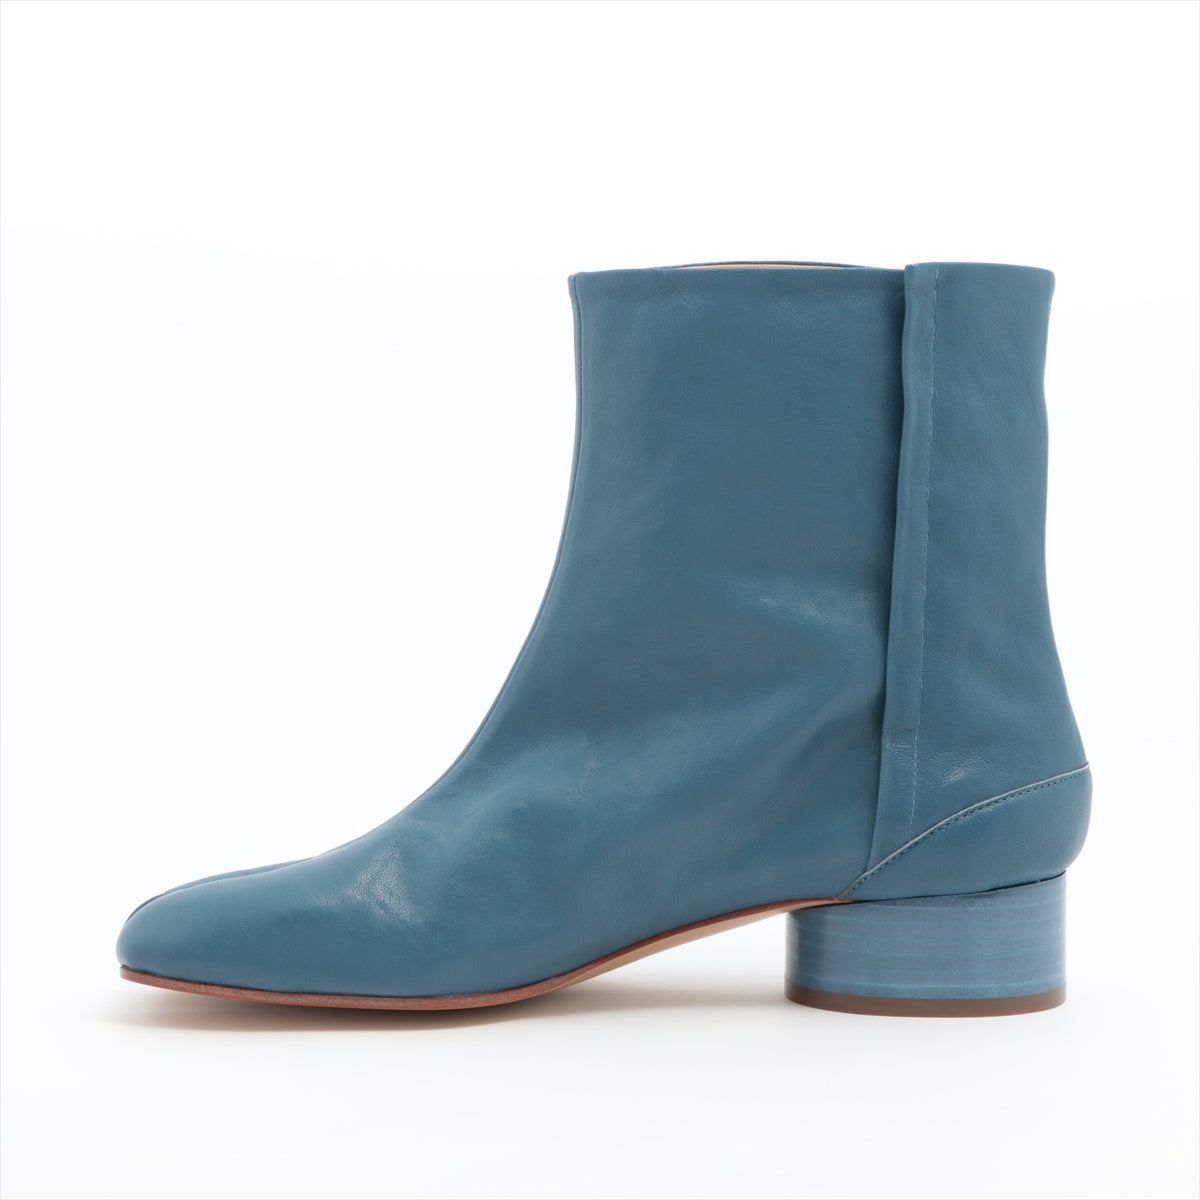 Maison Margiela TABI Leather Short Boots 40 Ladies' Blue 22 box There is a bag